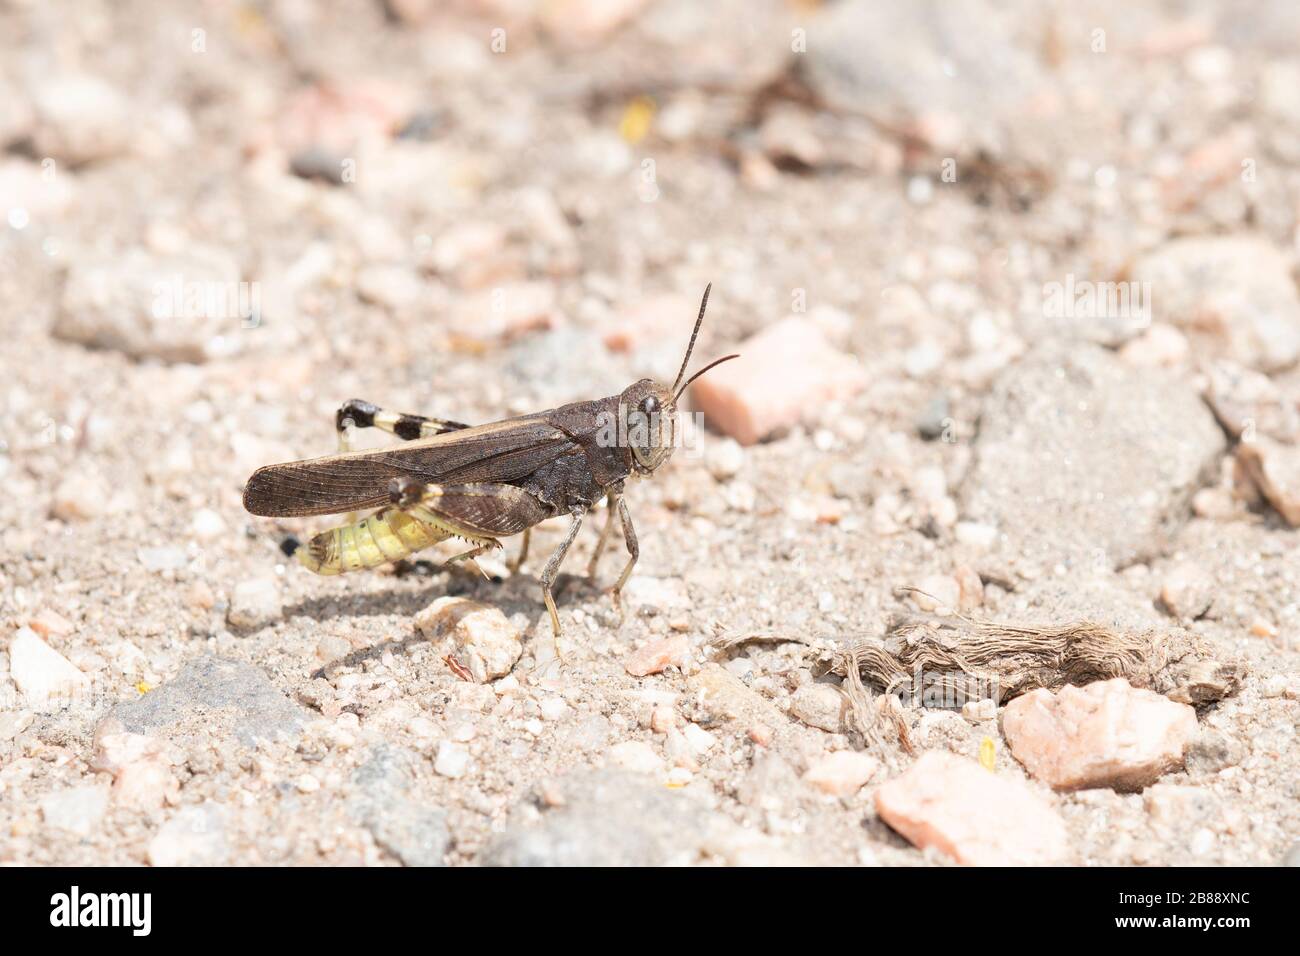 Speckle-winged Rangeland Grasshopper (Arphia conspersa) on the Ground on Dirt and Gravel in Colorado Stock Photo